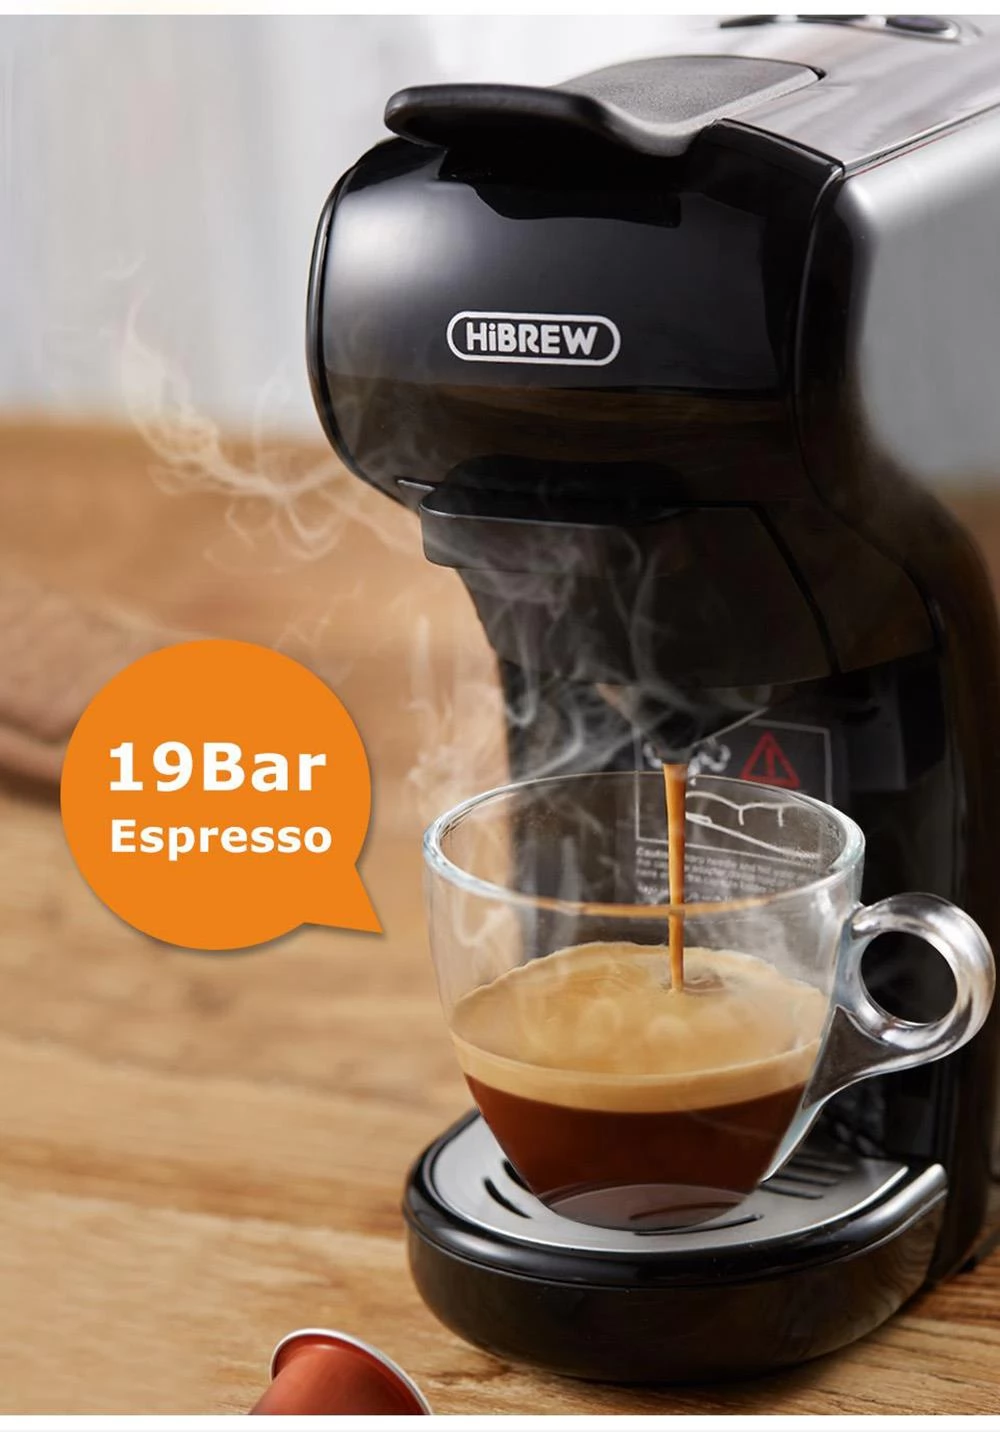 HiBREW H1A 1450W Espresso Koffiemachine, 19 Bar Extractie, Warm/Koud 4-in-1 Multiple Capsule Coffee Maker